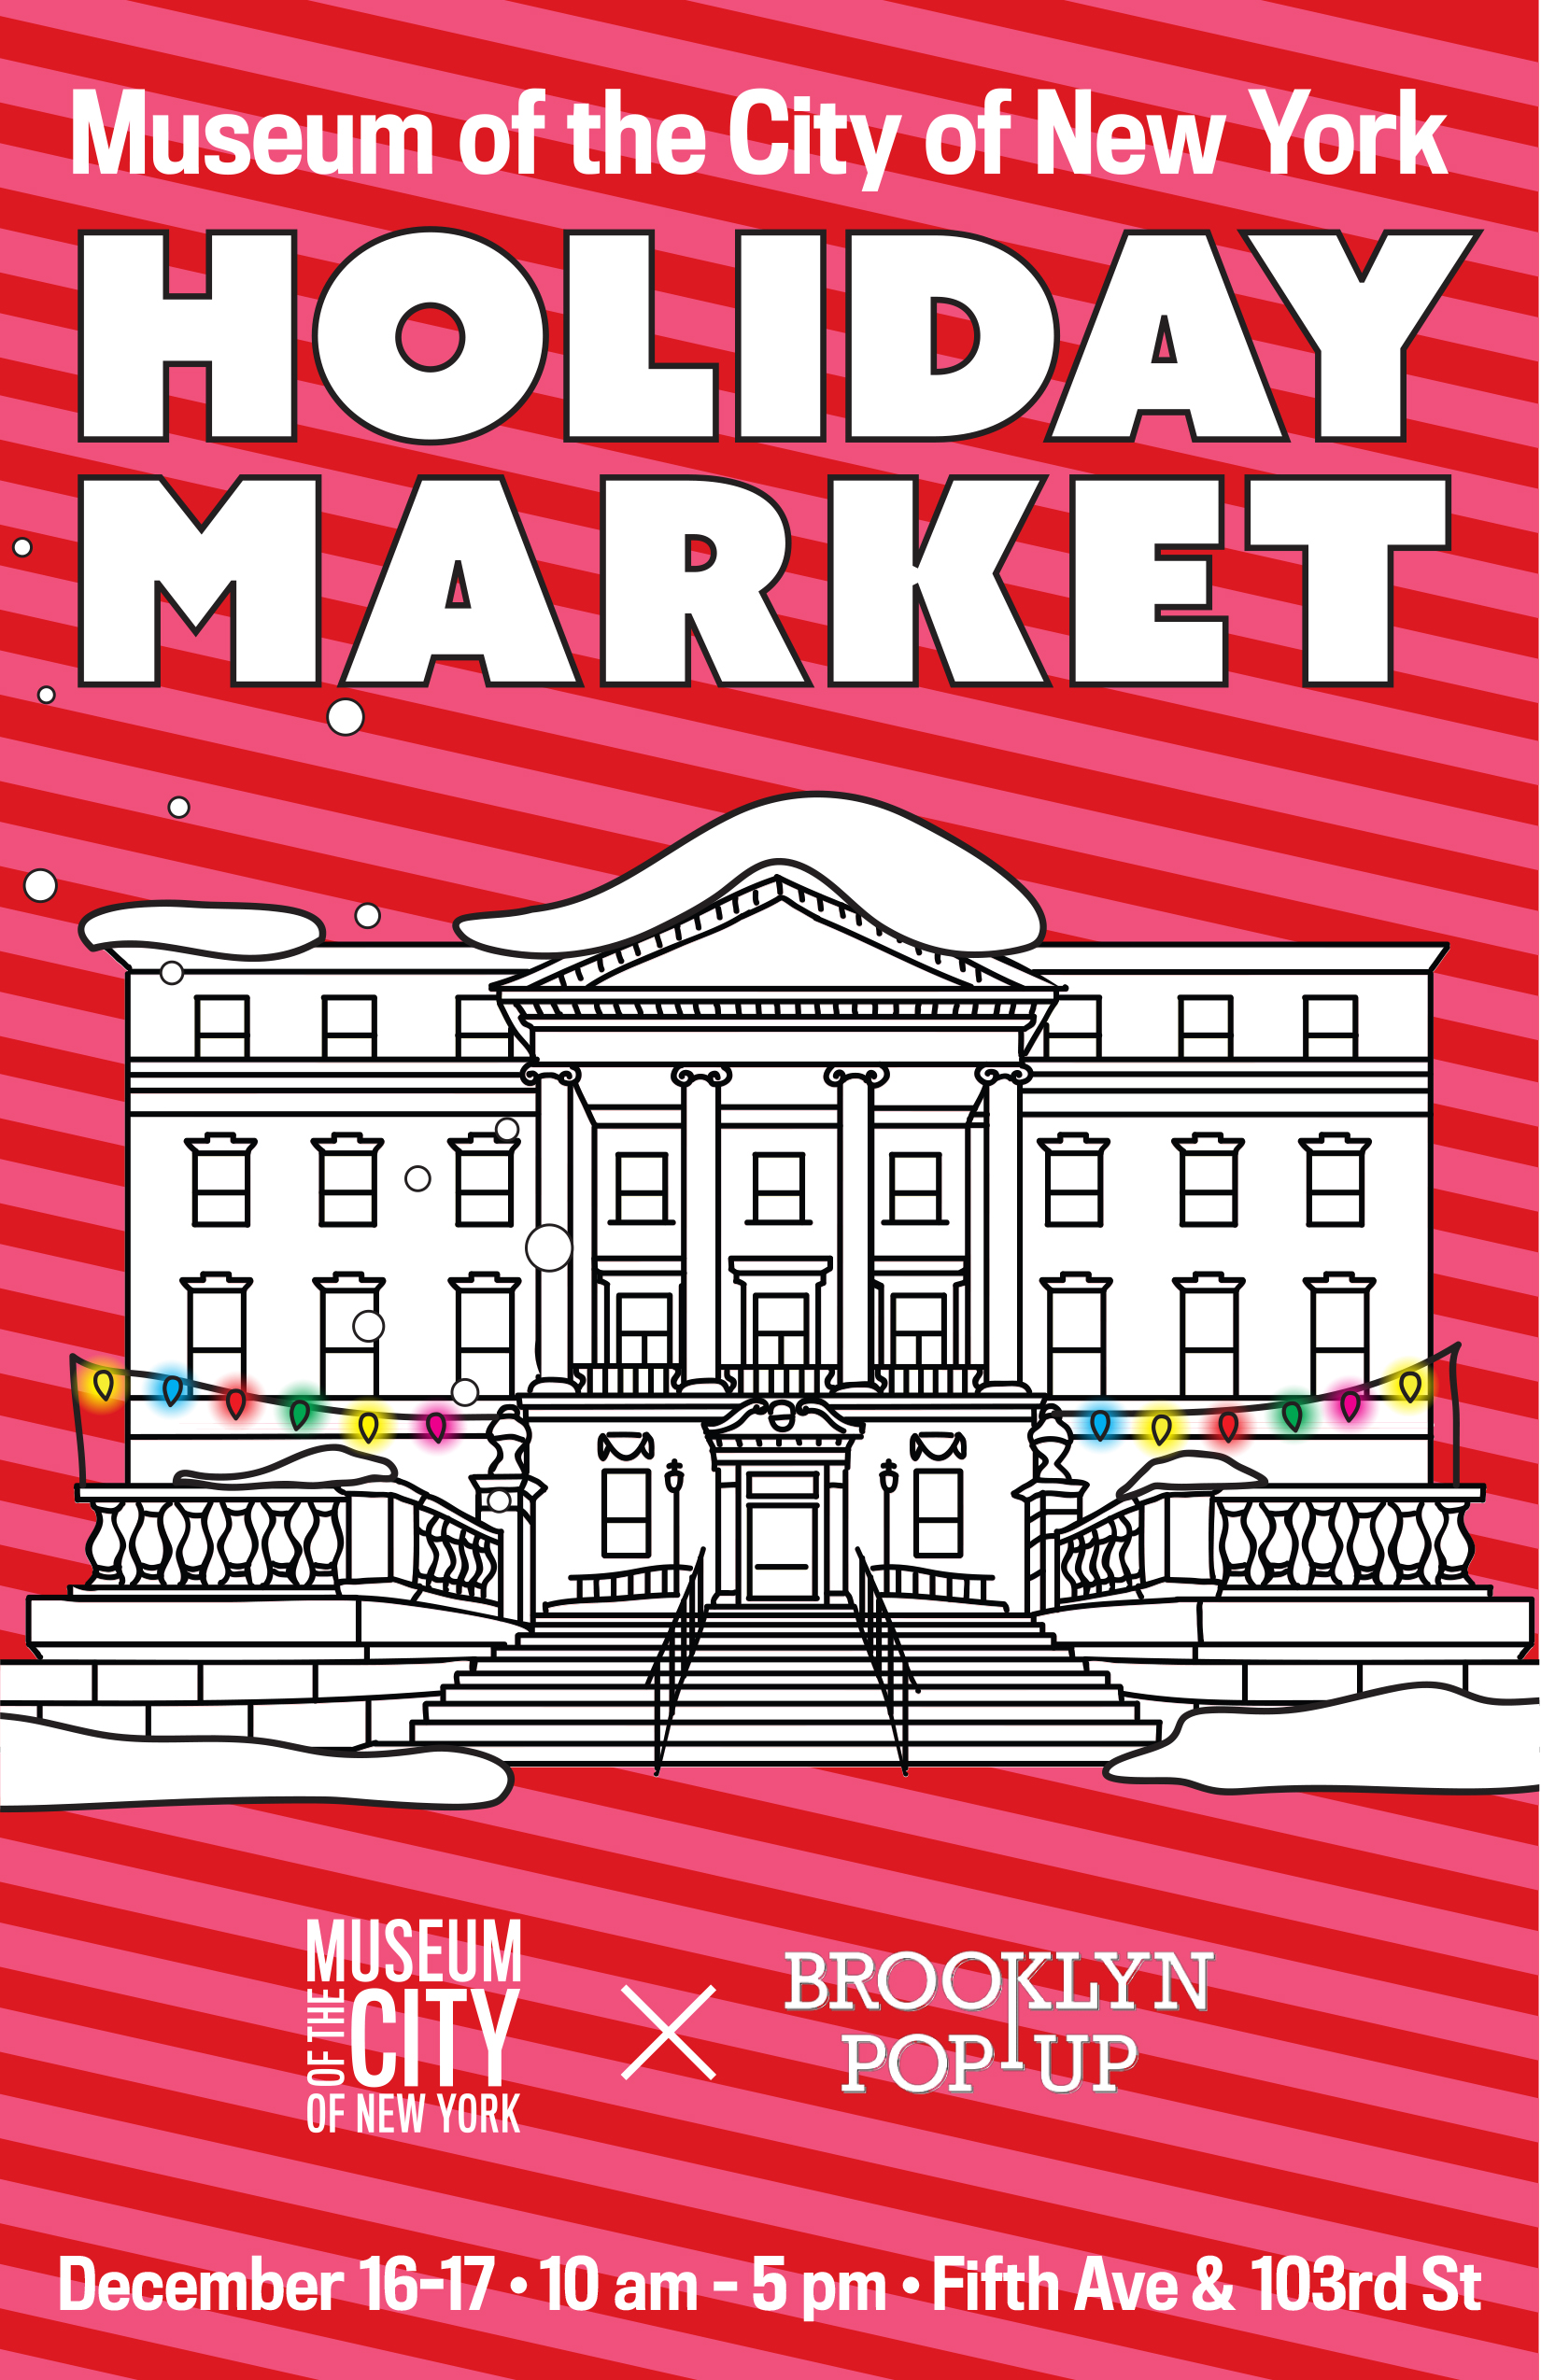 Flyer for the holiday market showing a Line drawing of the Museum facade with Christmas lights across the balcony. Red and pink striped diagonal background with text "Holiday Market" in bold uppercase lettering above the drawing. Information about the event is below..